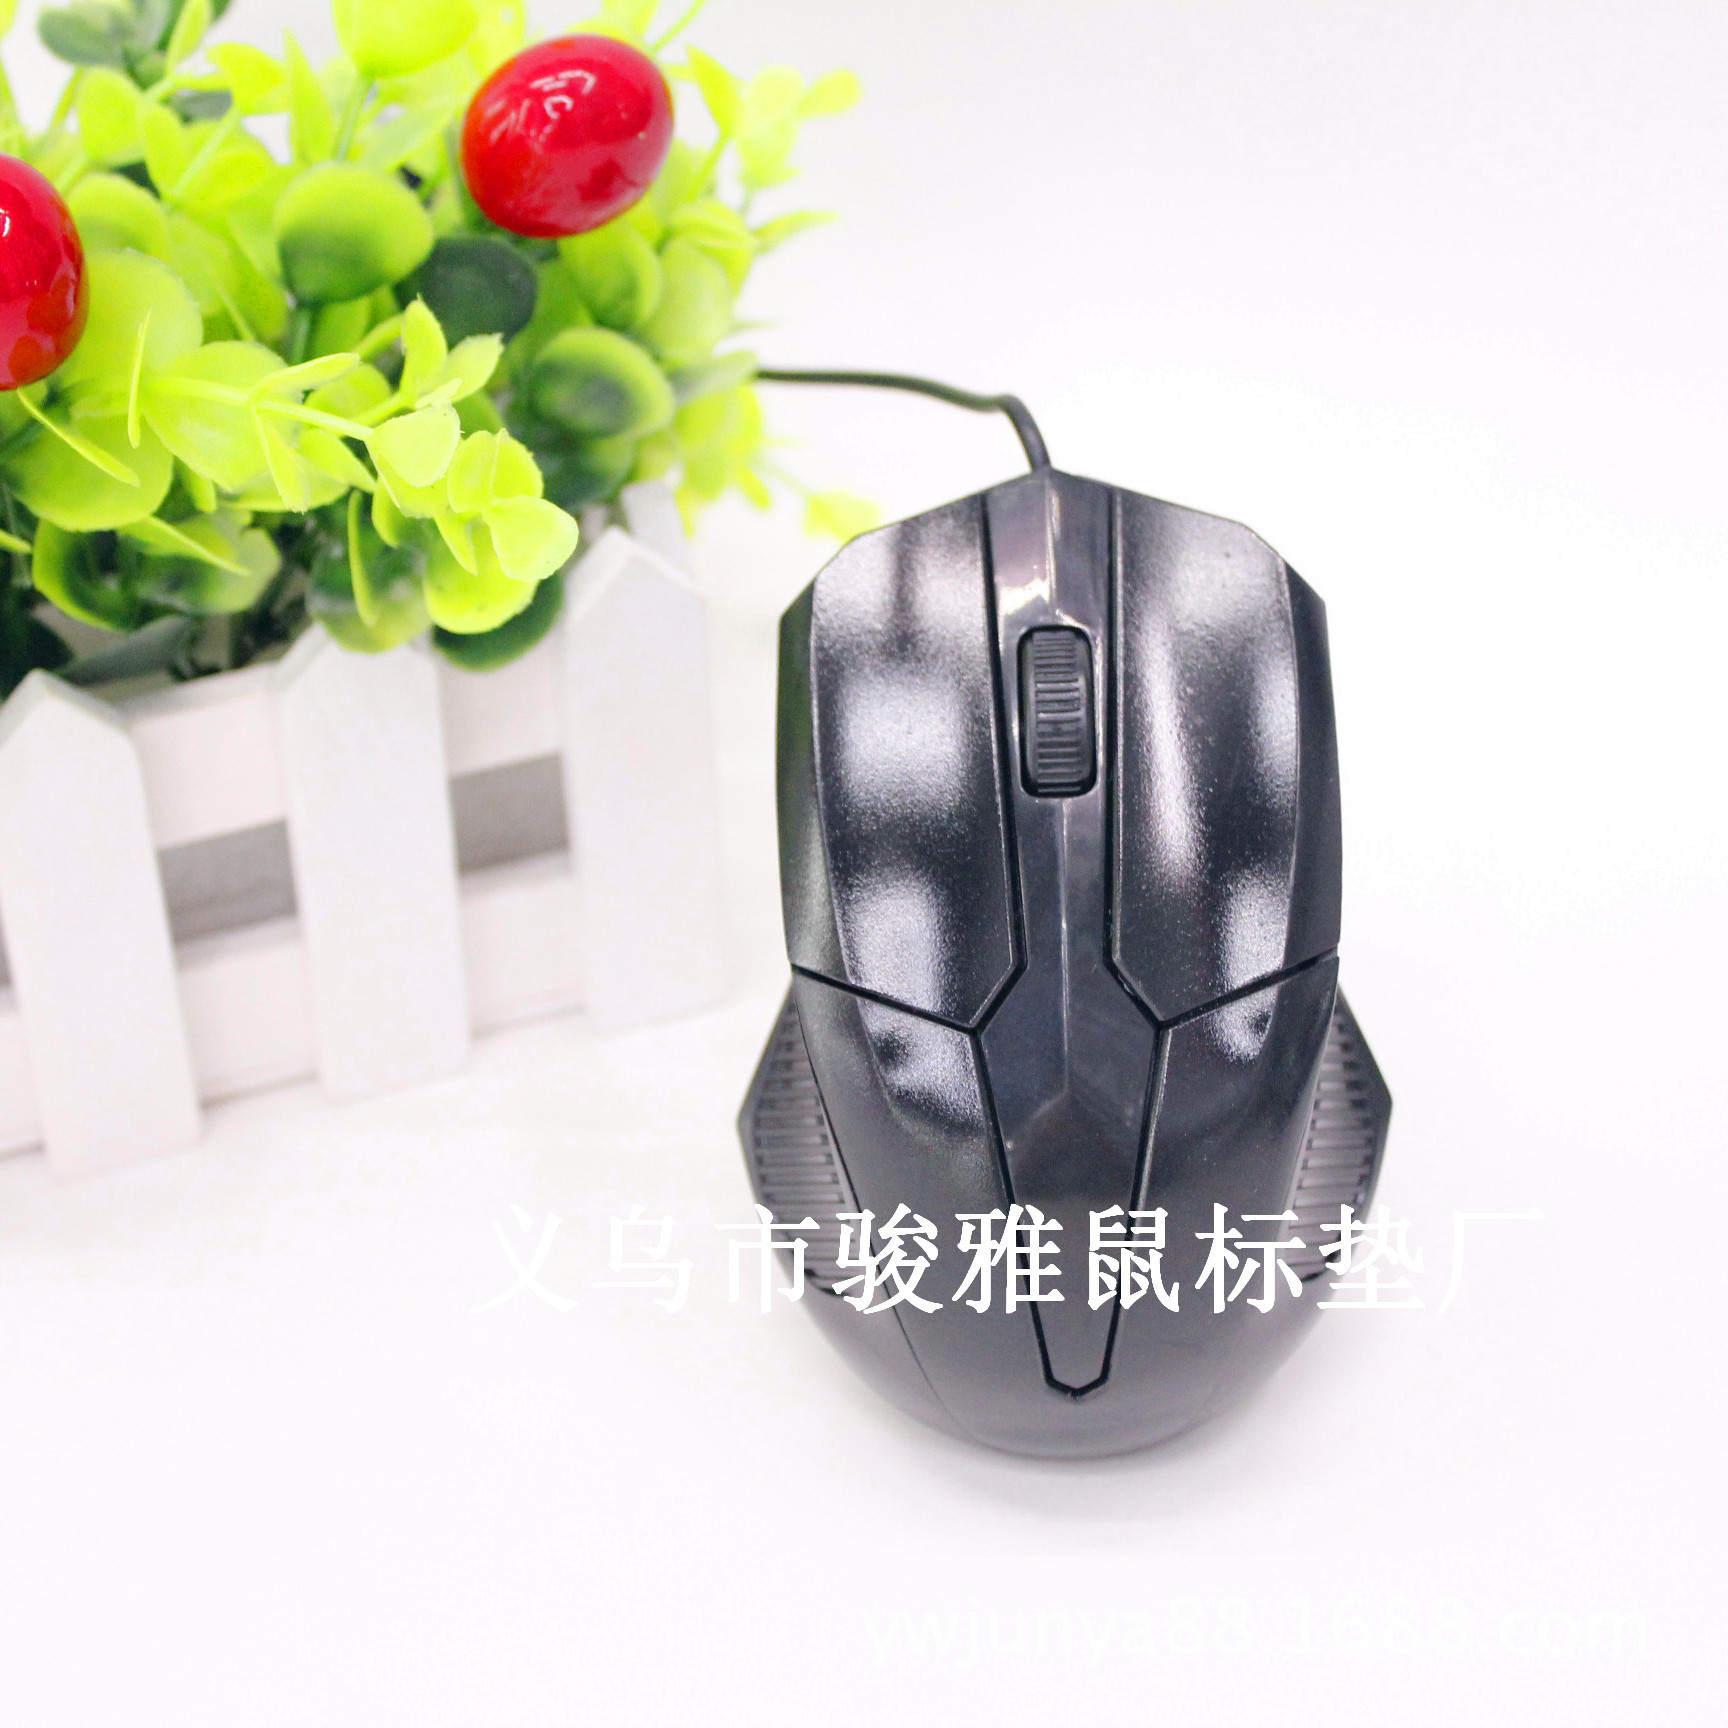 A new wired mouse